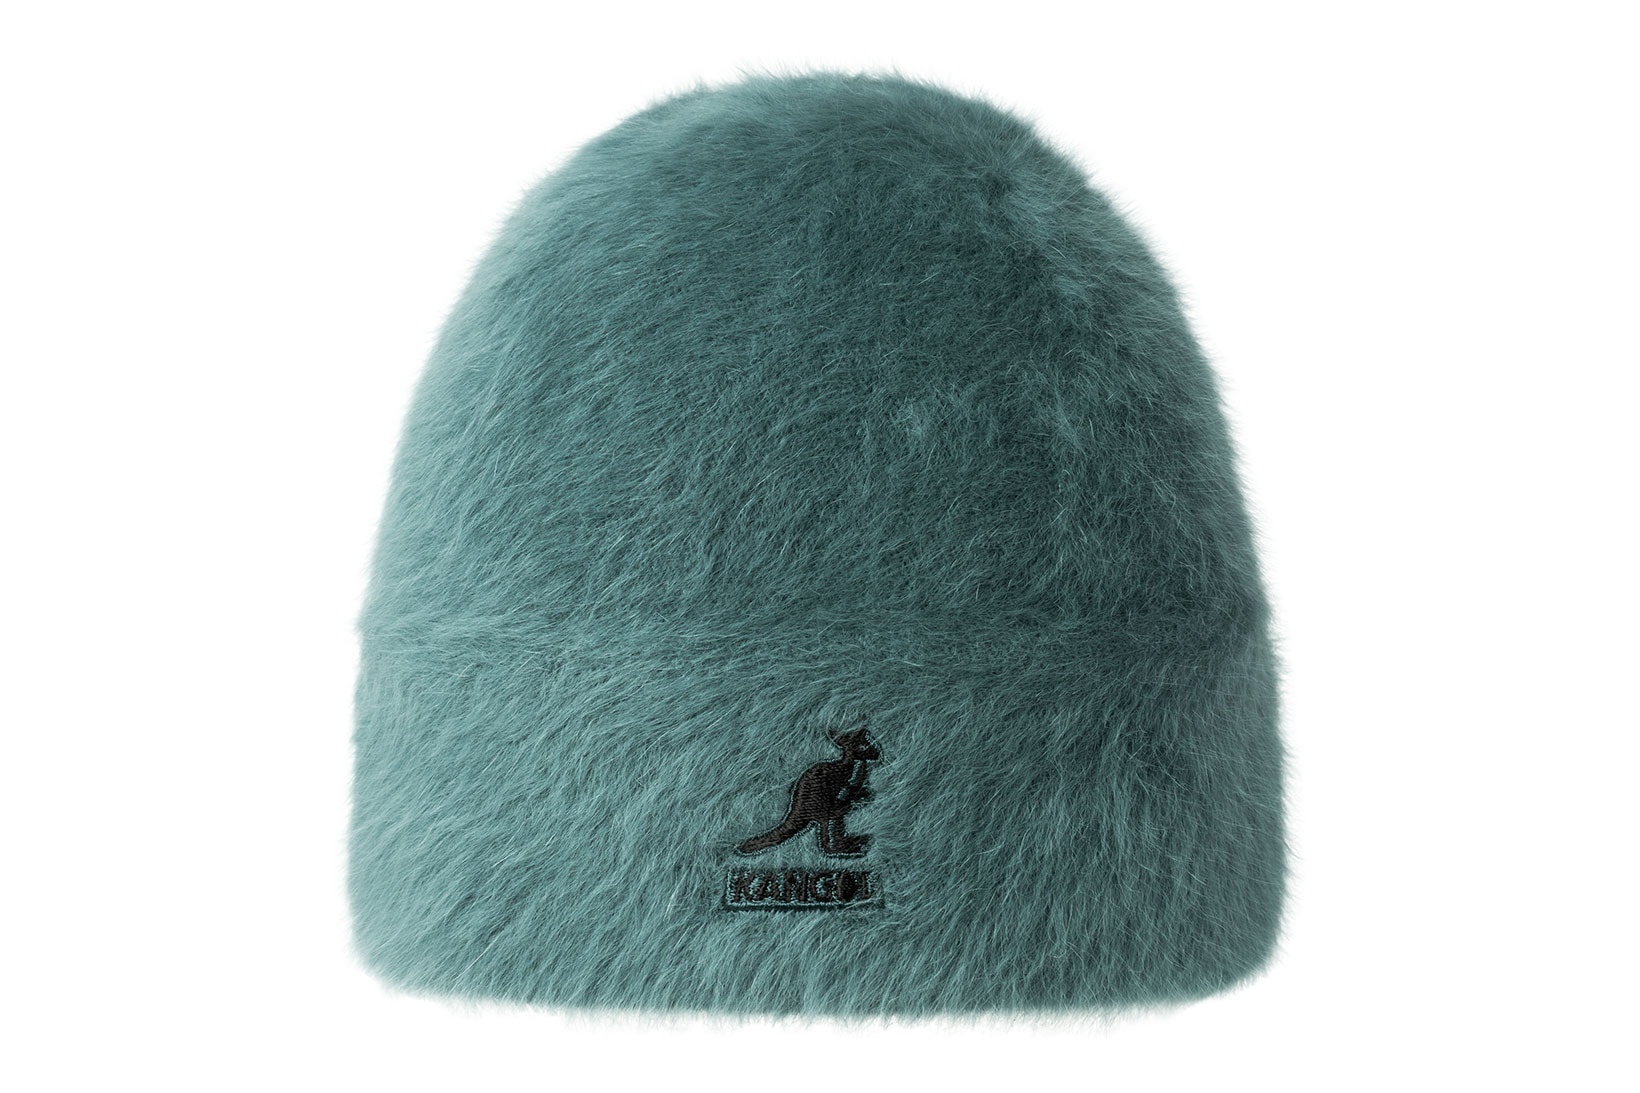 kangol fall winter fw201 headwear collection hats accessories beanie faux fur angora teal turquoise green